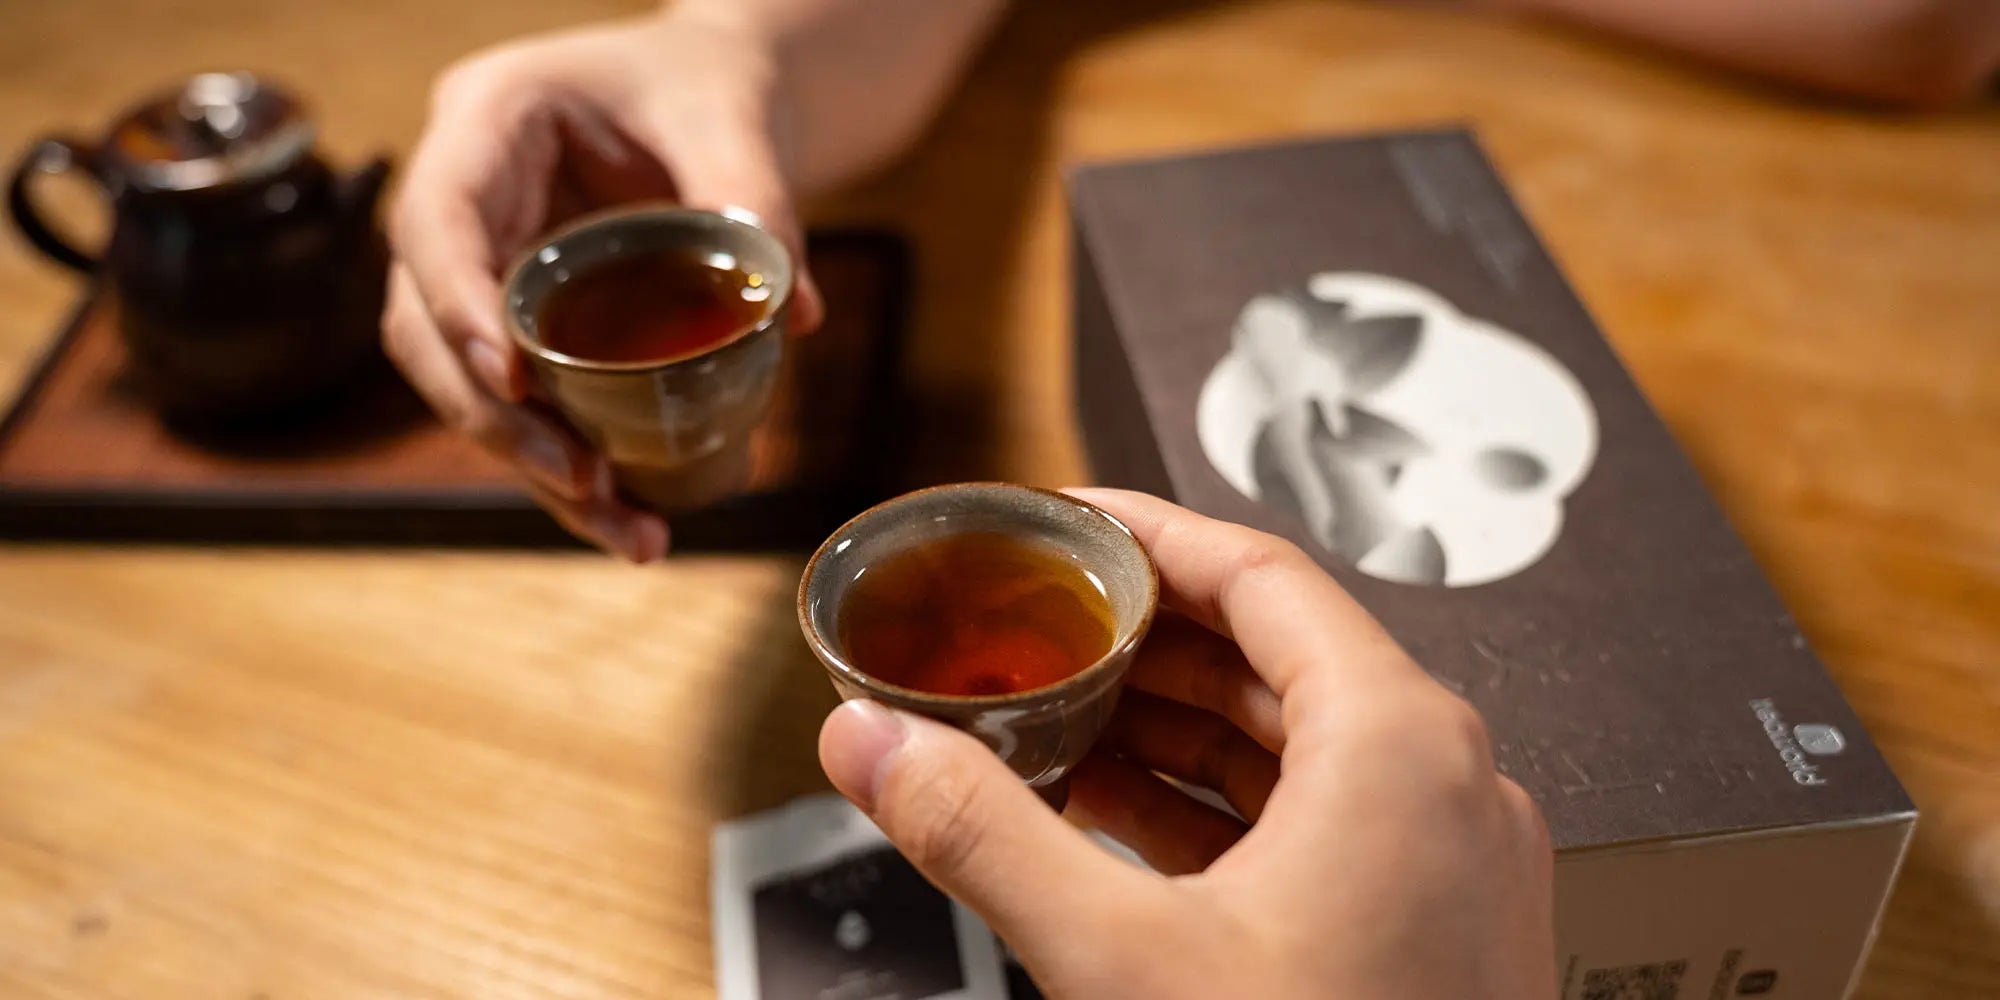 Share a Healthy Cup Of Tea With The One You Love